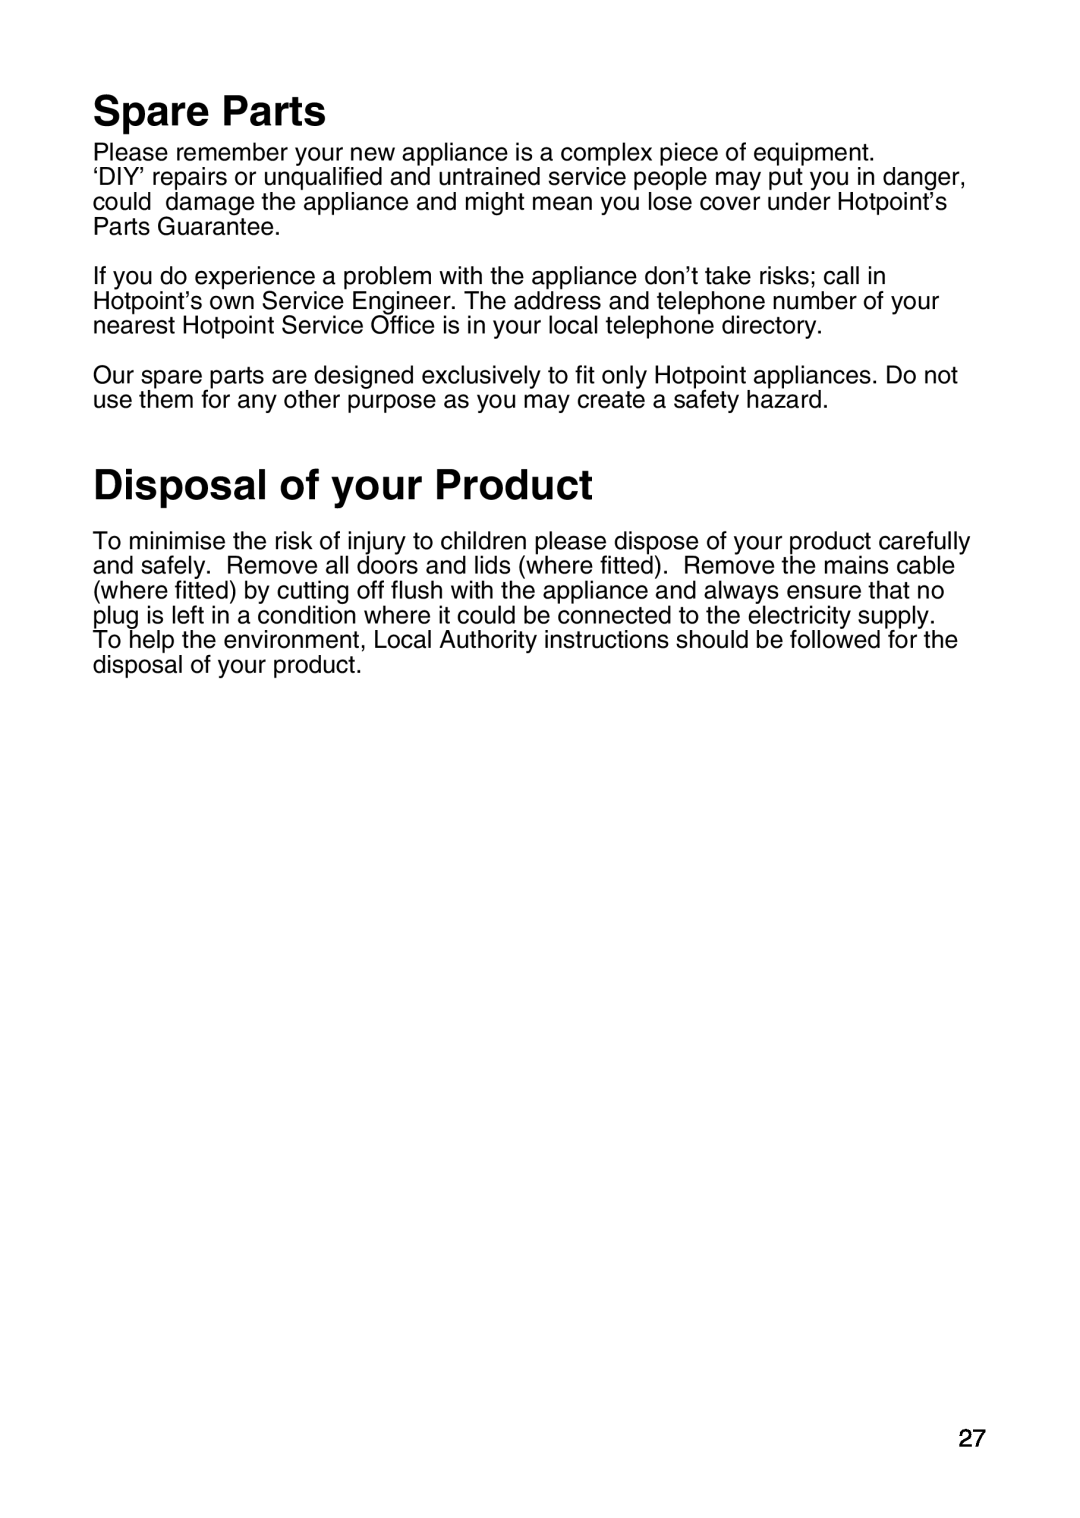 Hotpoint EW31 installation instructions Spare Parts, Disposal of your Product 